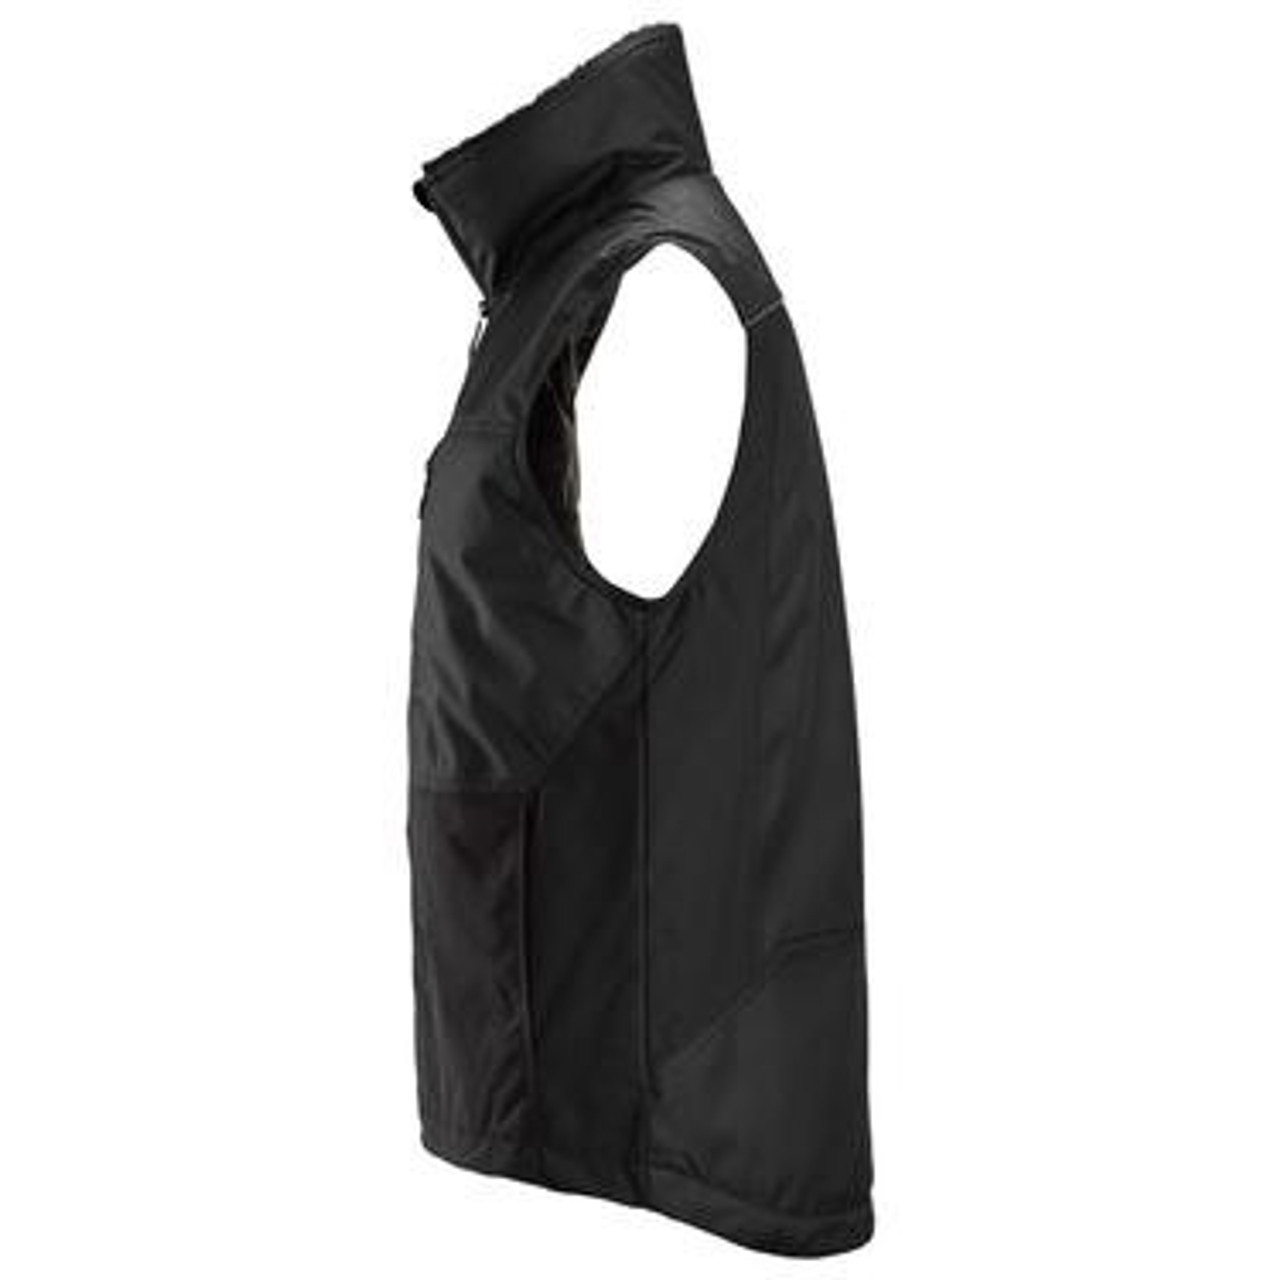 SNICKERS Vest  4548 with  for SNICKERS Vest | 4548 Black Full Zip Allround Work Winter Vest with Pile Lining that have Full Zip  available in Australia and New Zealand